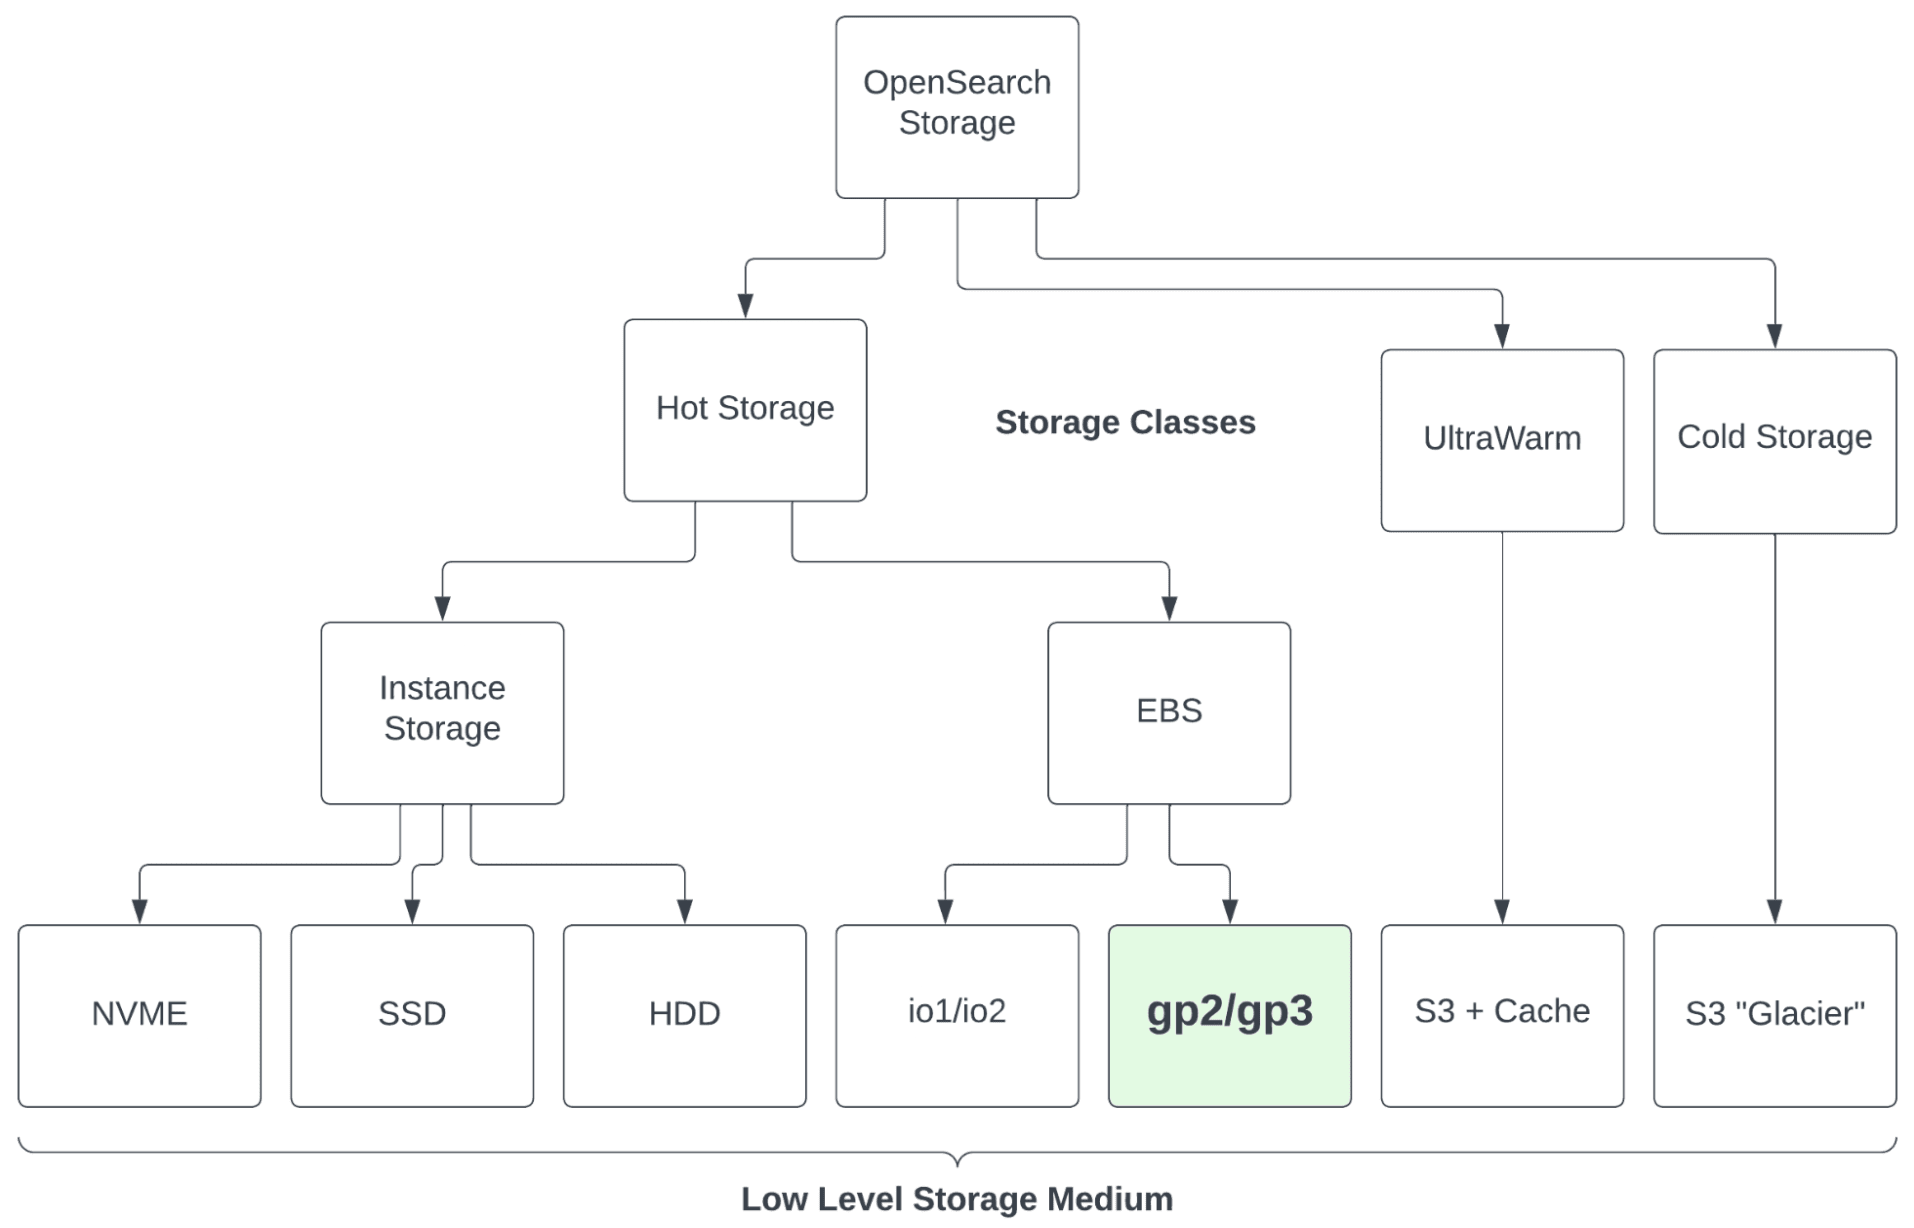 A chart showing the storage types for OpenSearch